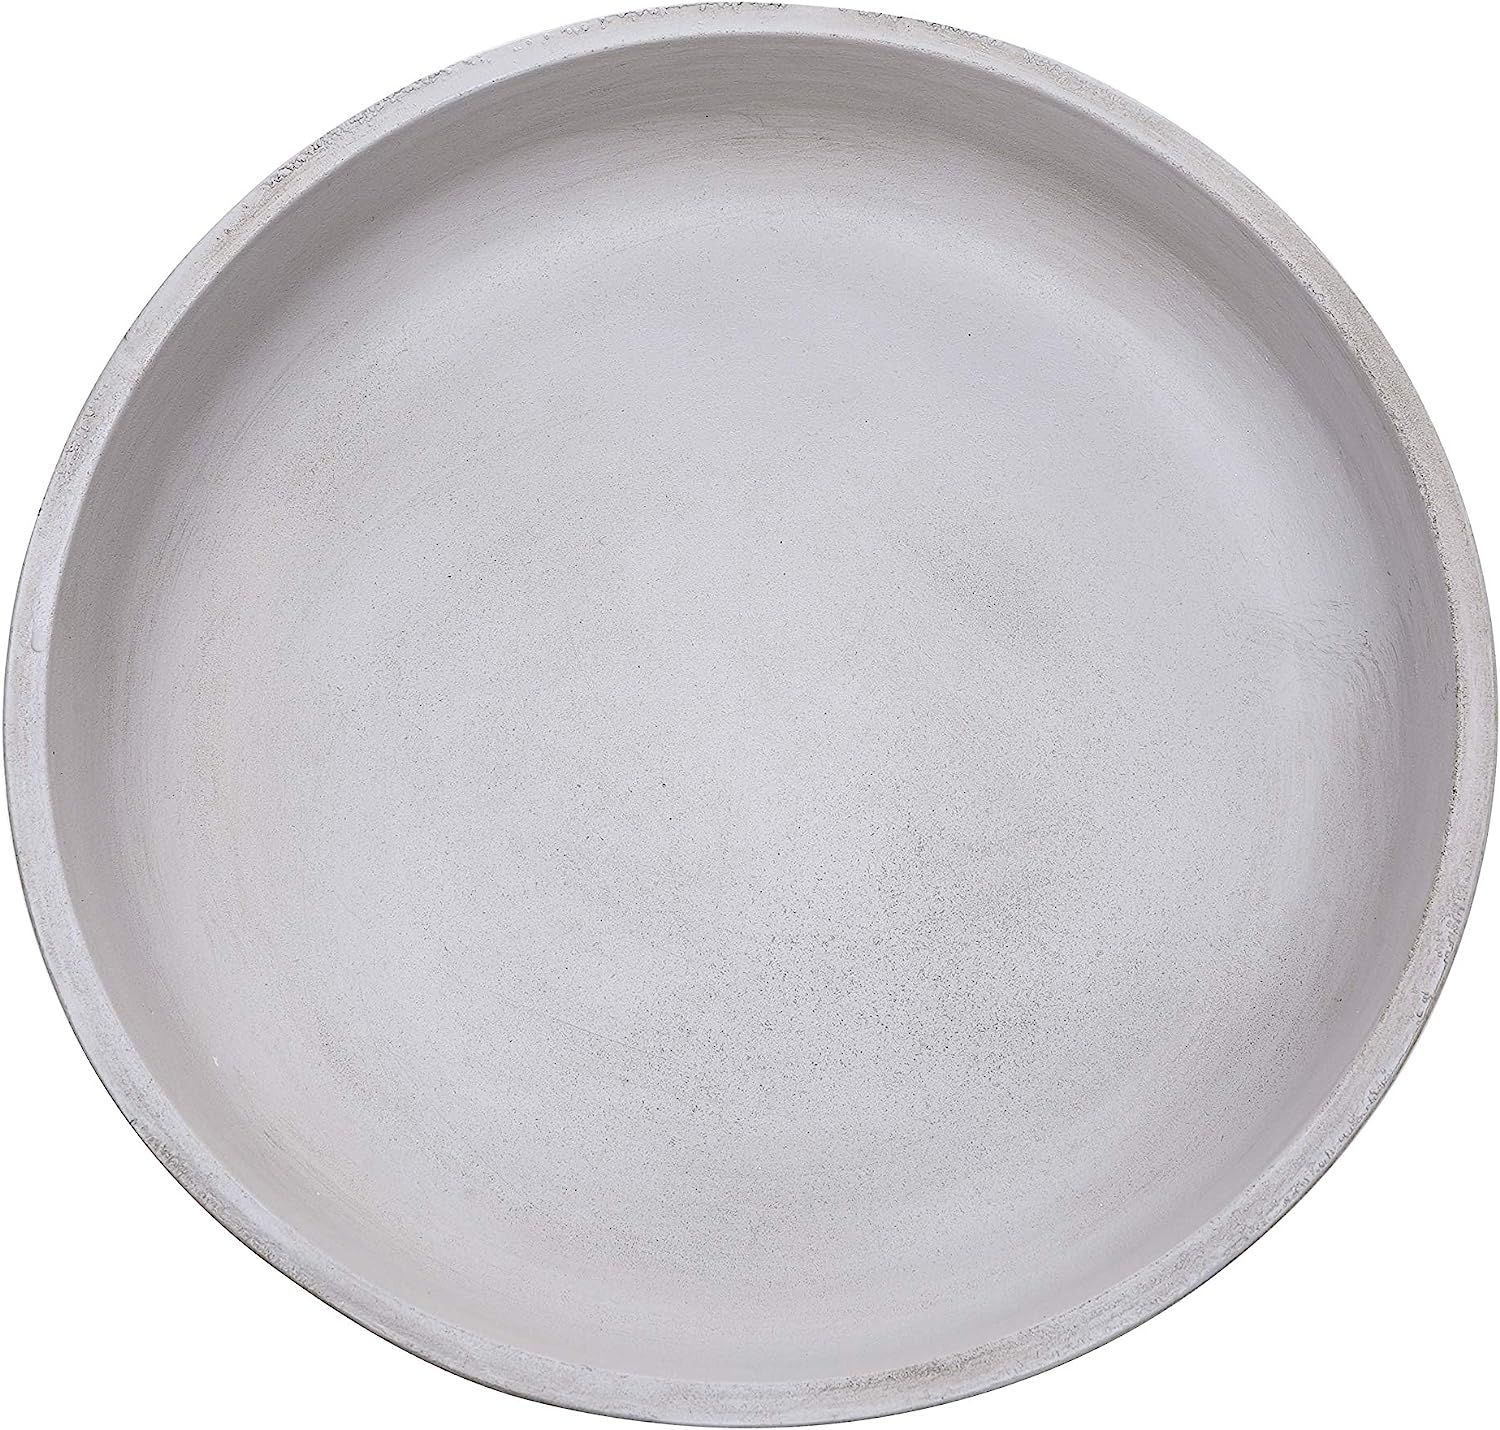 DNDECONATION Faded Gray Round Wooden Decorative Tray 11 in Home Decoration Tabletop Centerpiece | Amazon (US)